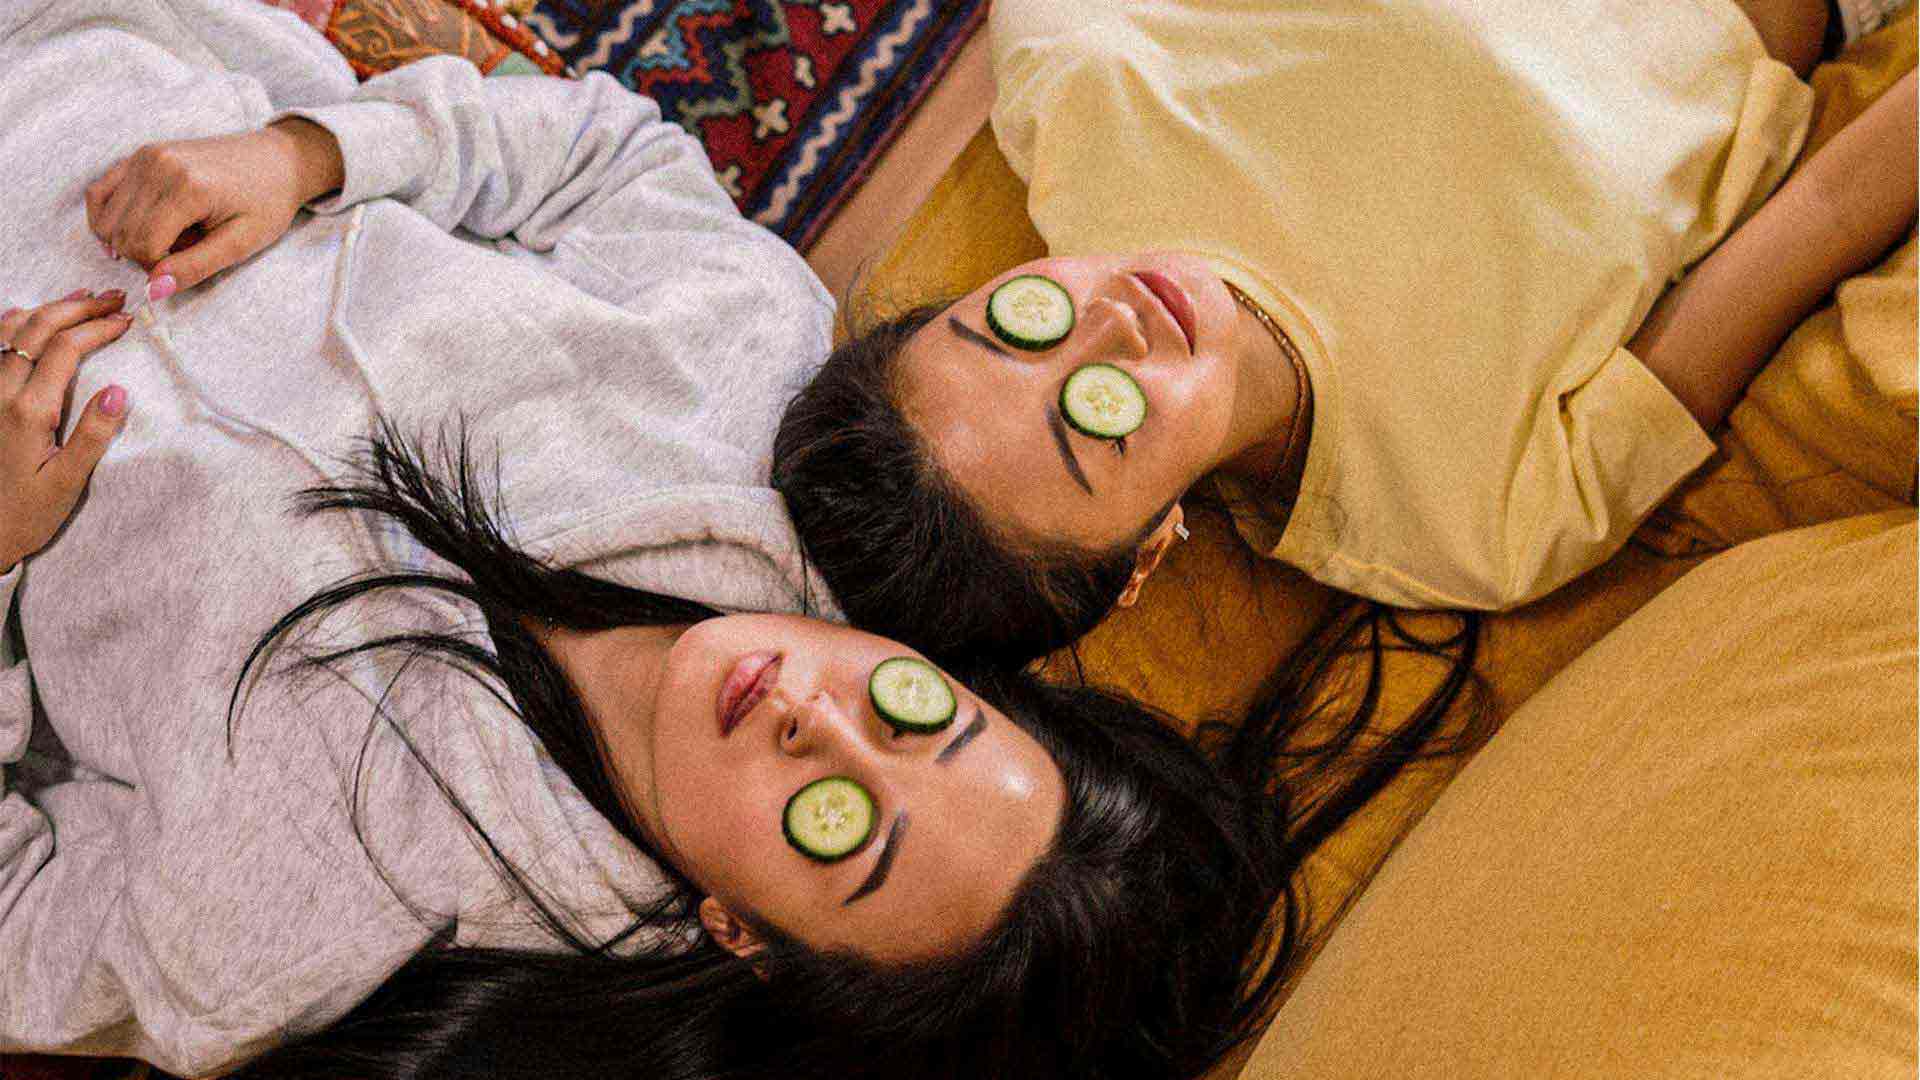 two woman with cucumber slices over their eyes